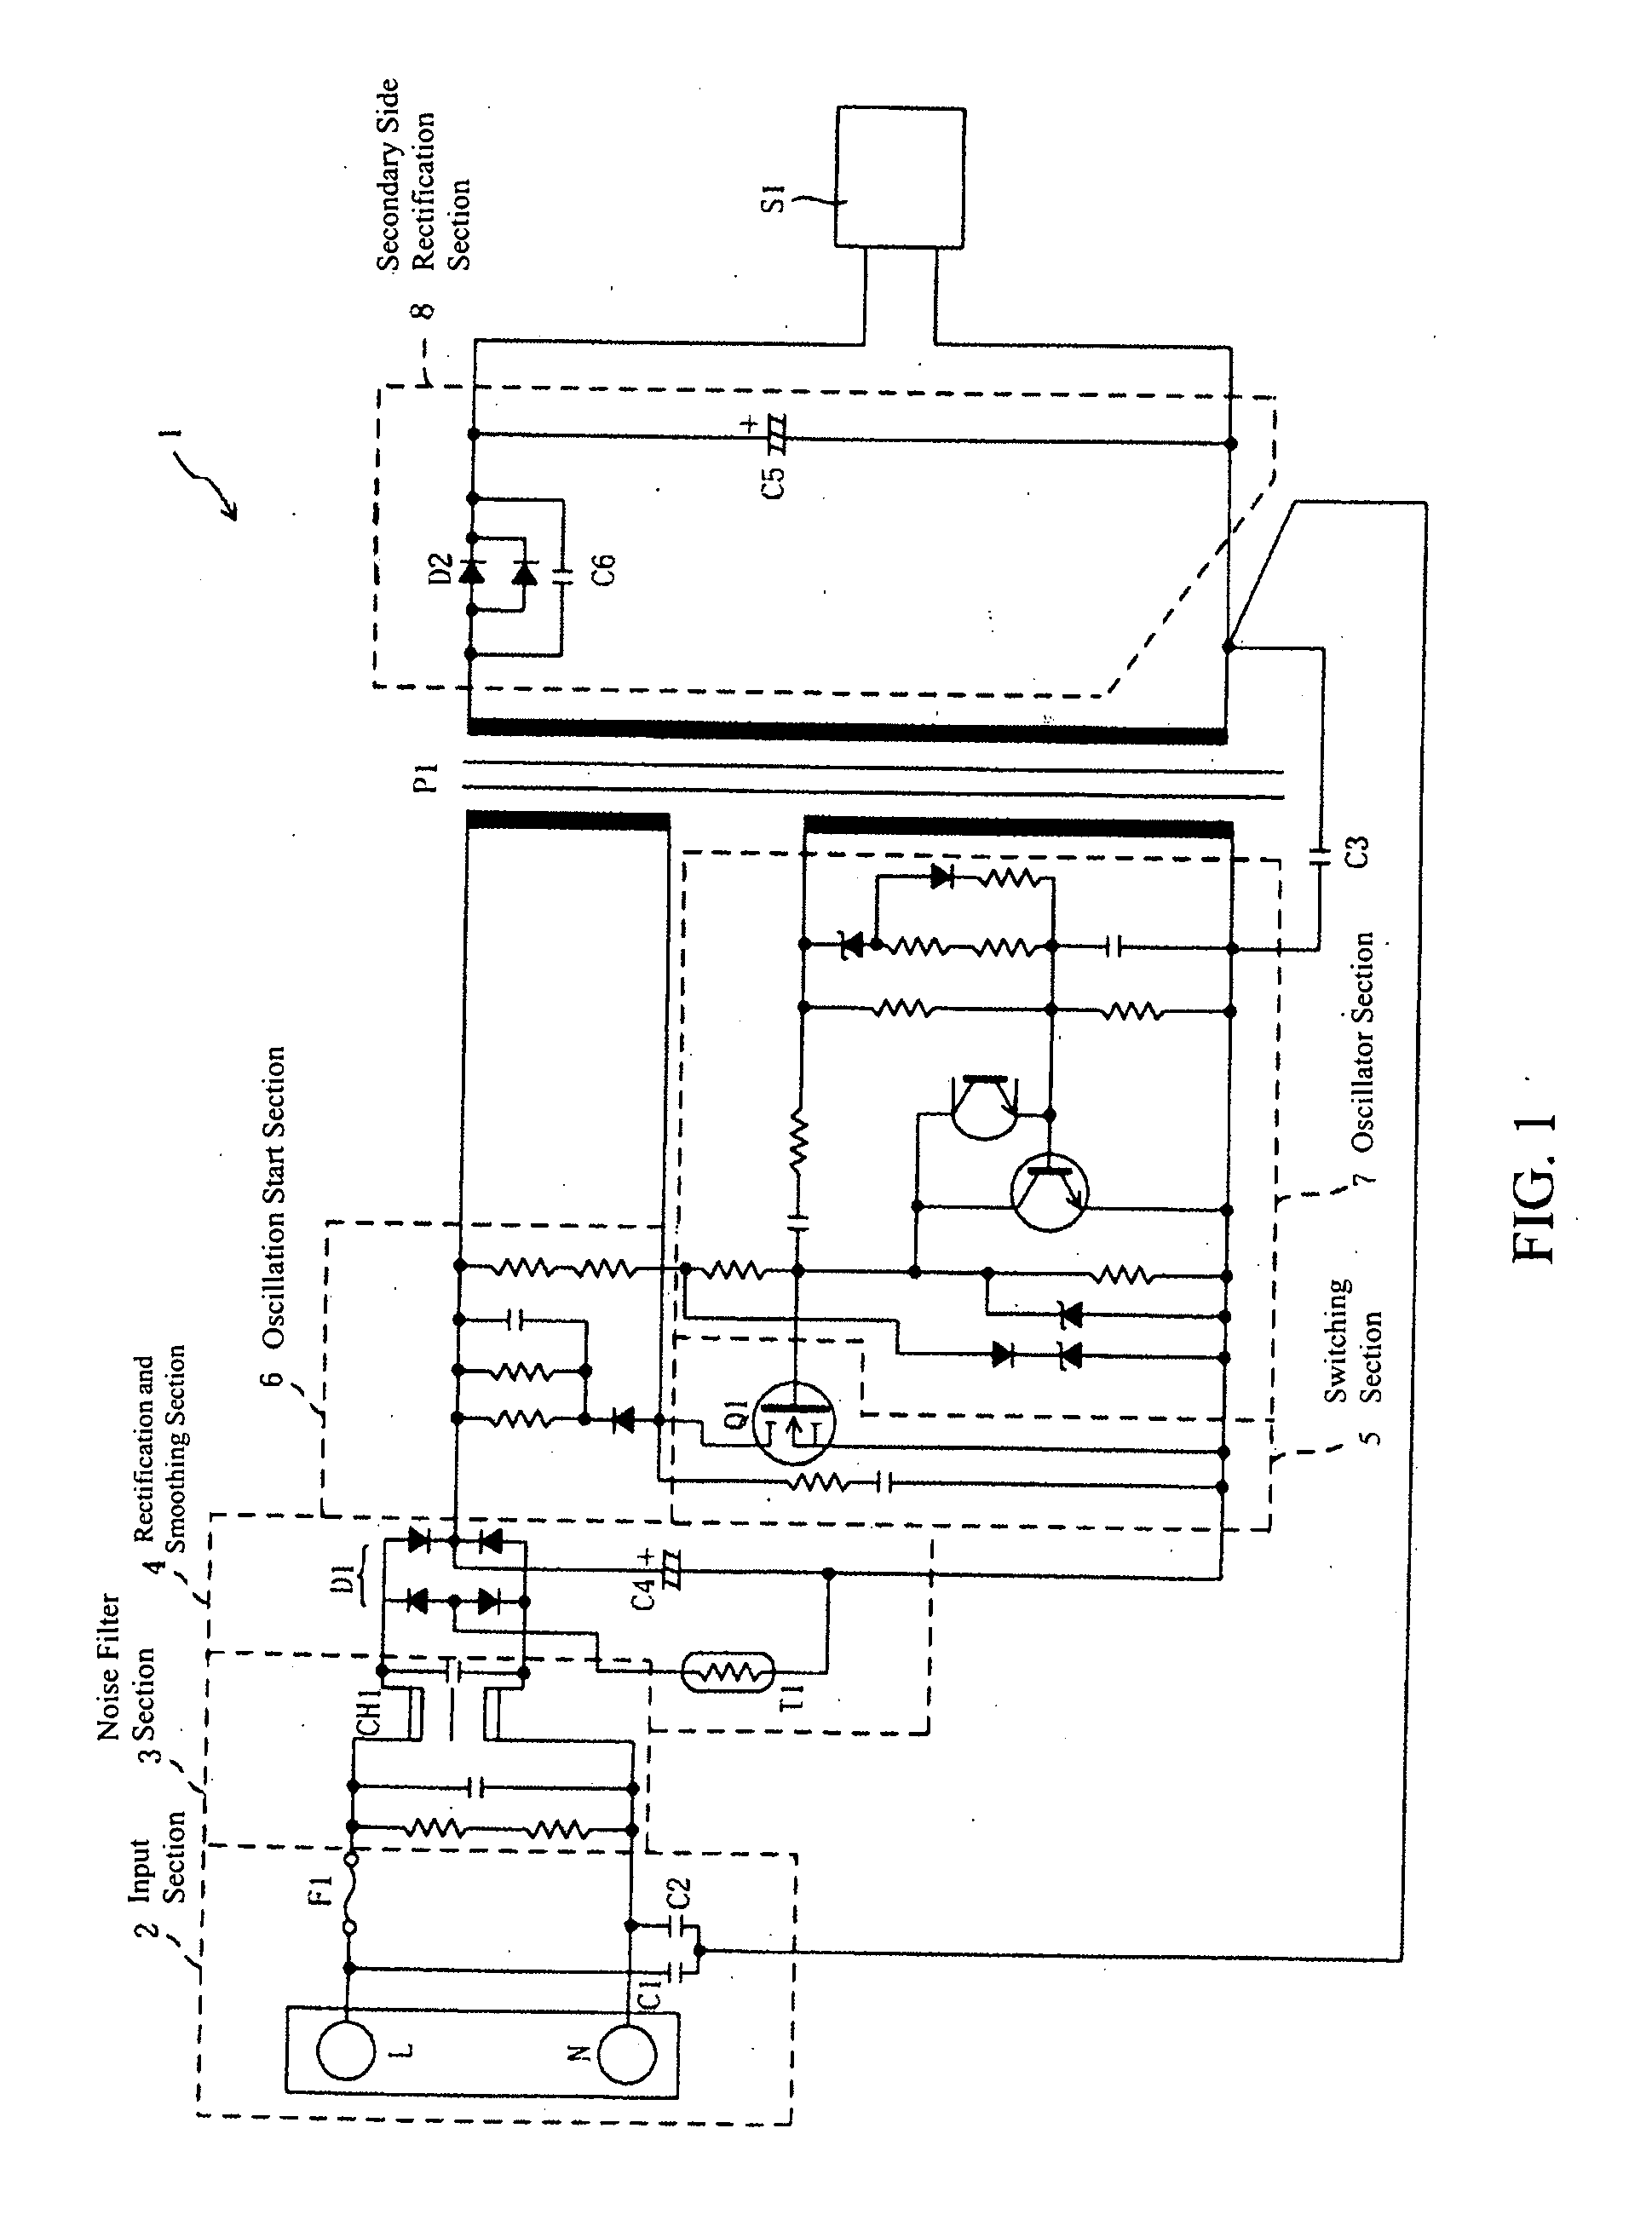 Switching power supply apparatus and method